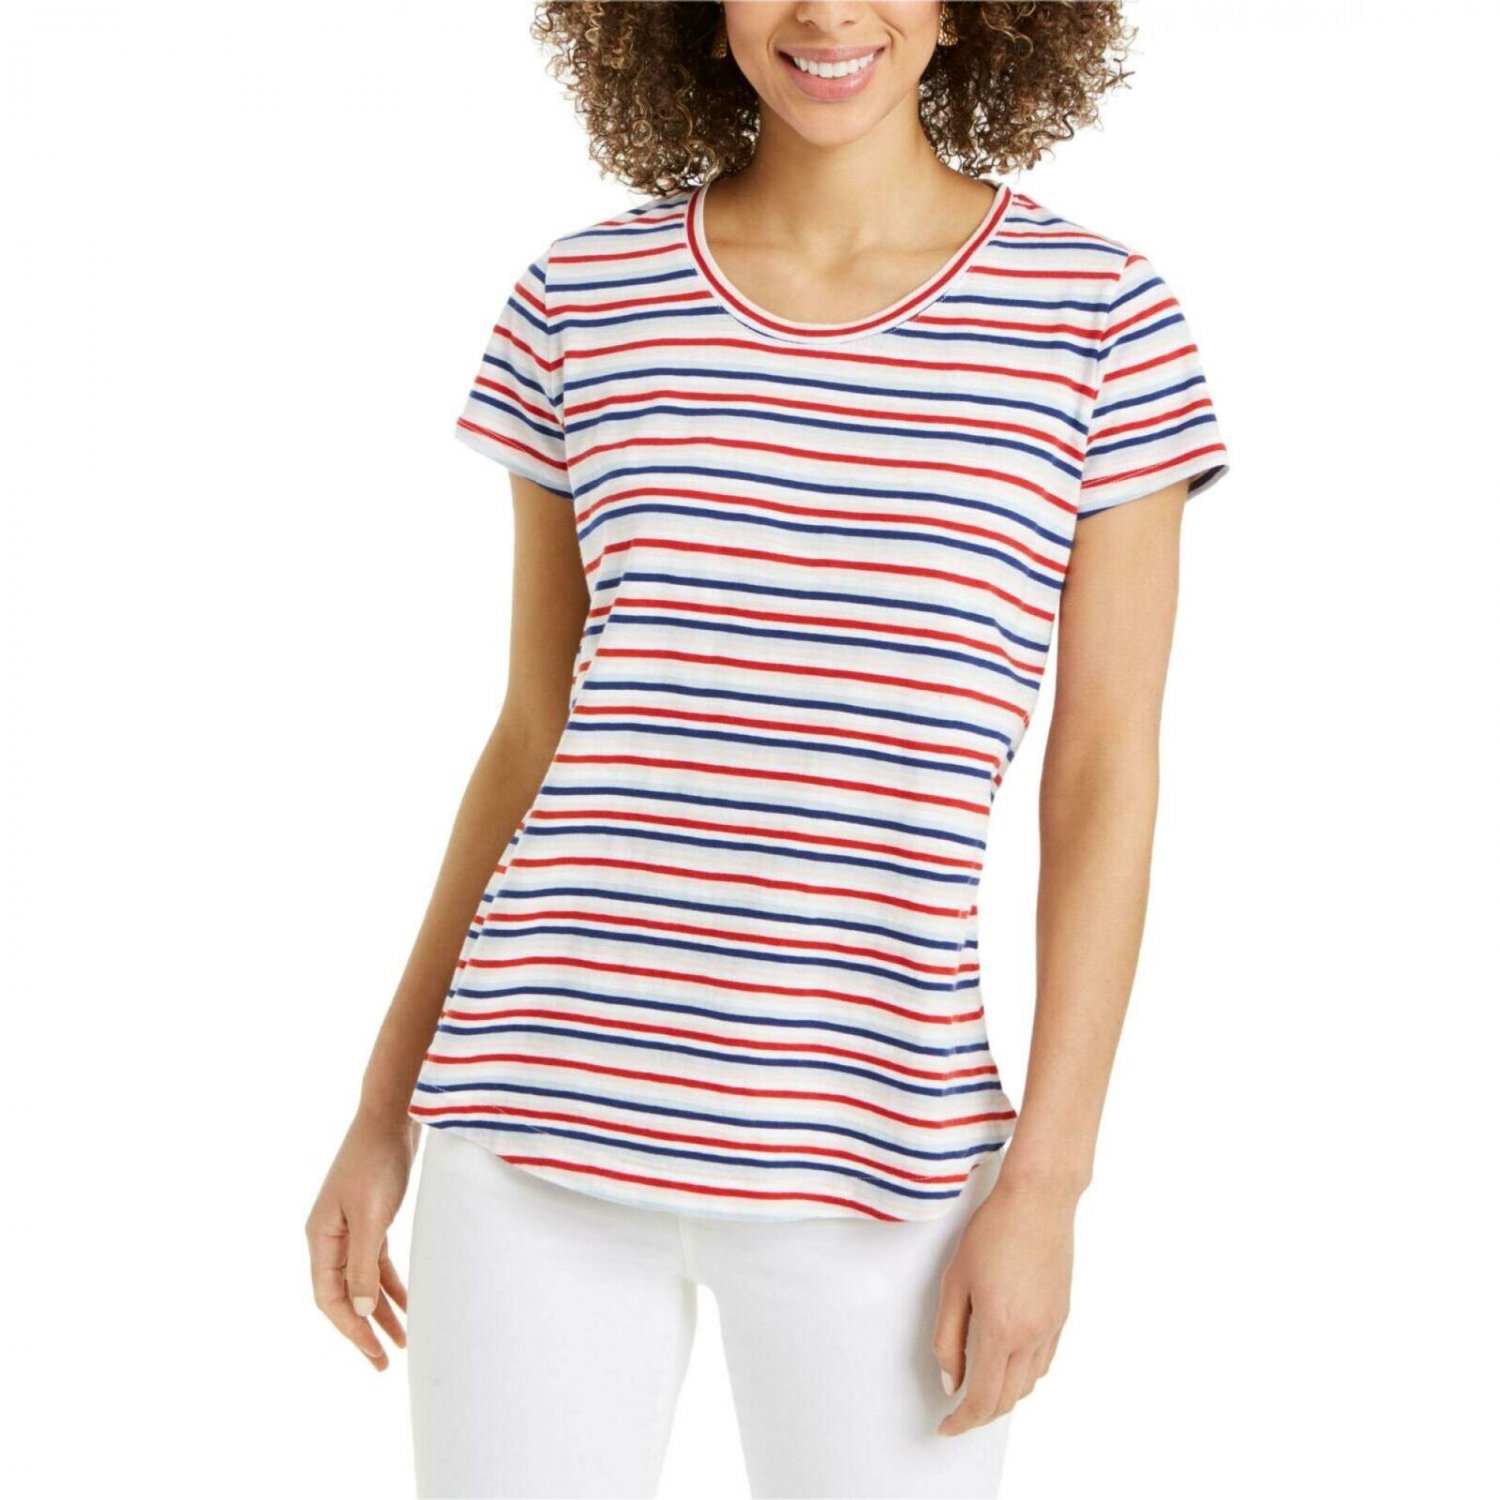 Style & Co Women's Scoop Neck Patterned T-Shirt X-Small Banner Stripe Red